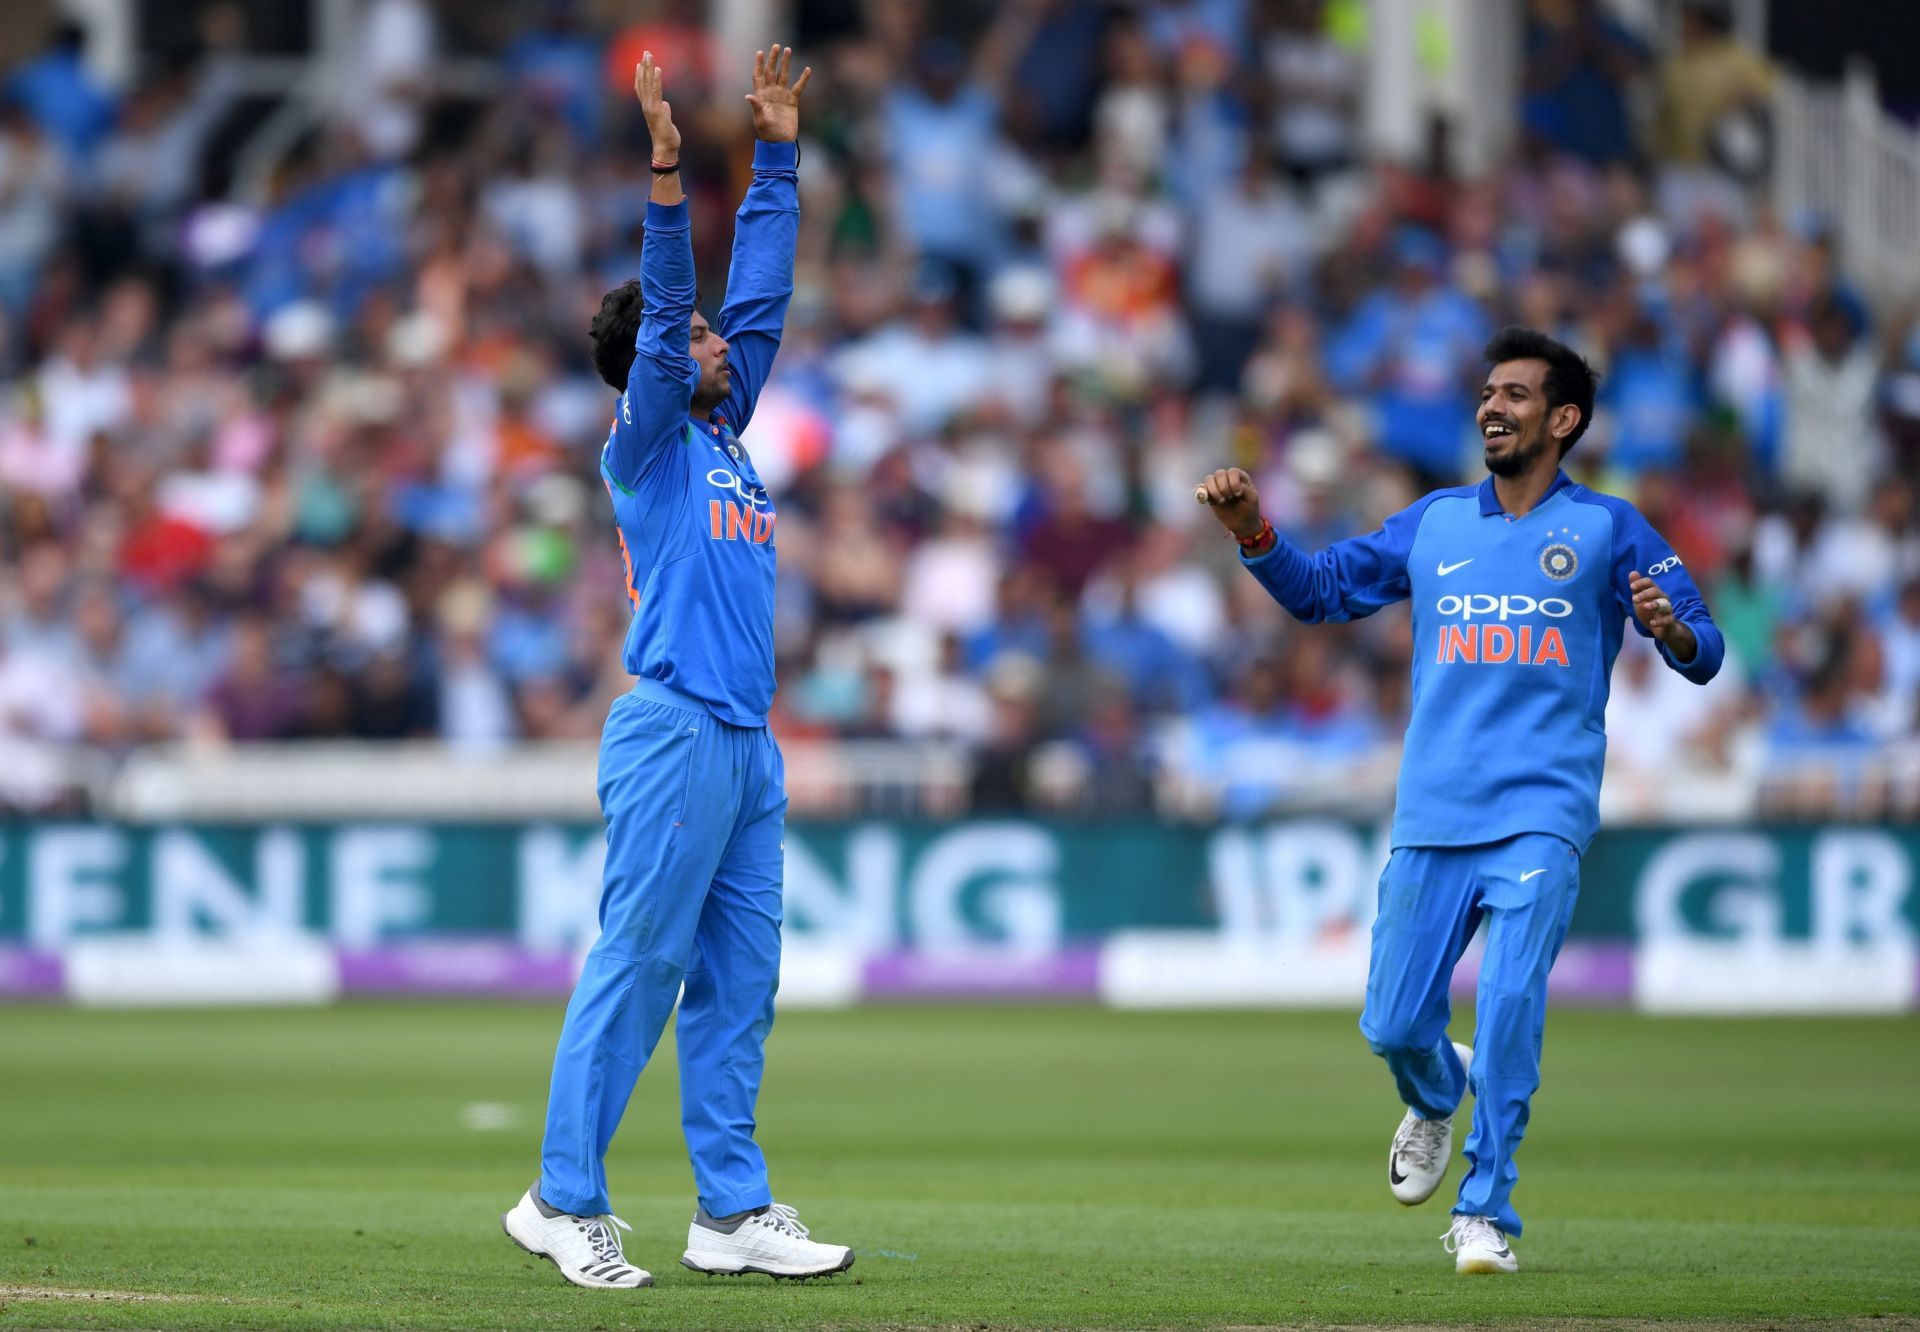 India fielded Kuldeep Yadav and Yuzvendra Chahal in tandem in the first T20I.